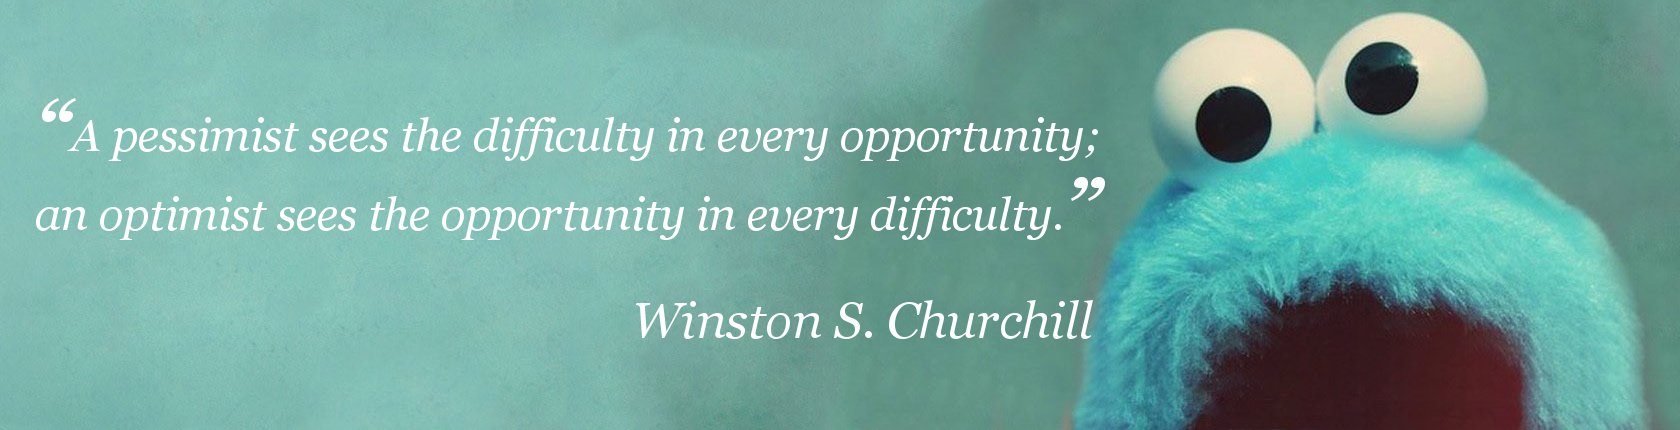 The Cookie Monster's head sits besides a quote from Winston Churchill that says “A pessimist sees the difficulty in every opportunity; an optimist sees the opportunity in every difficulty.”